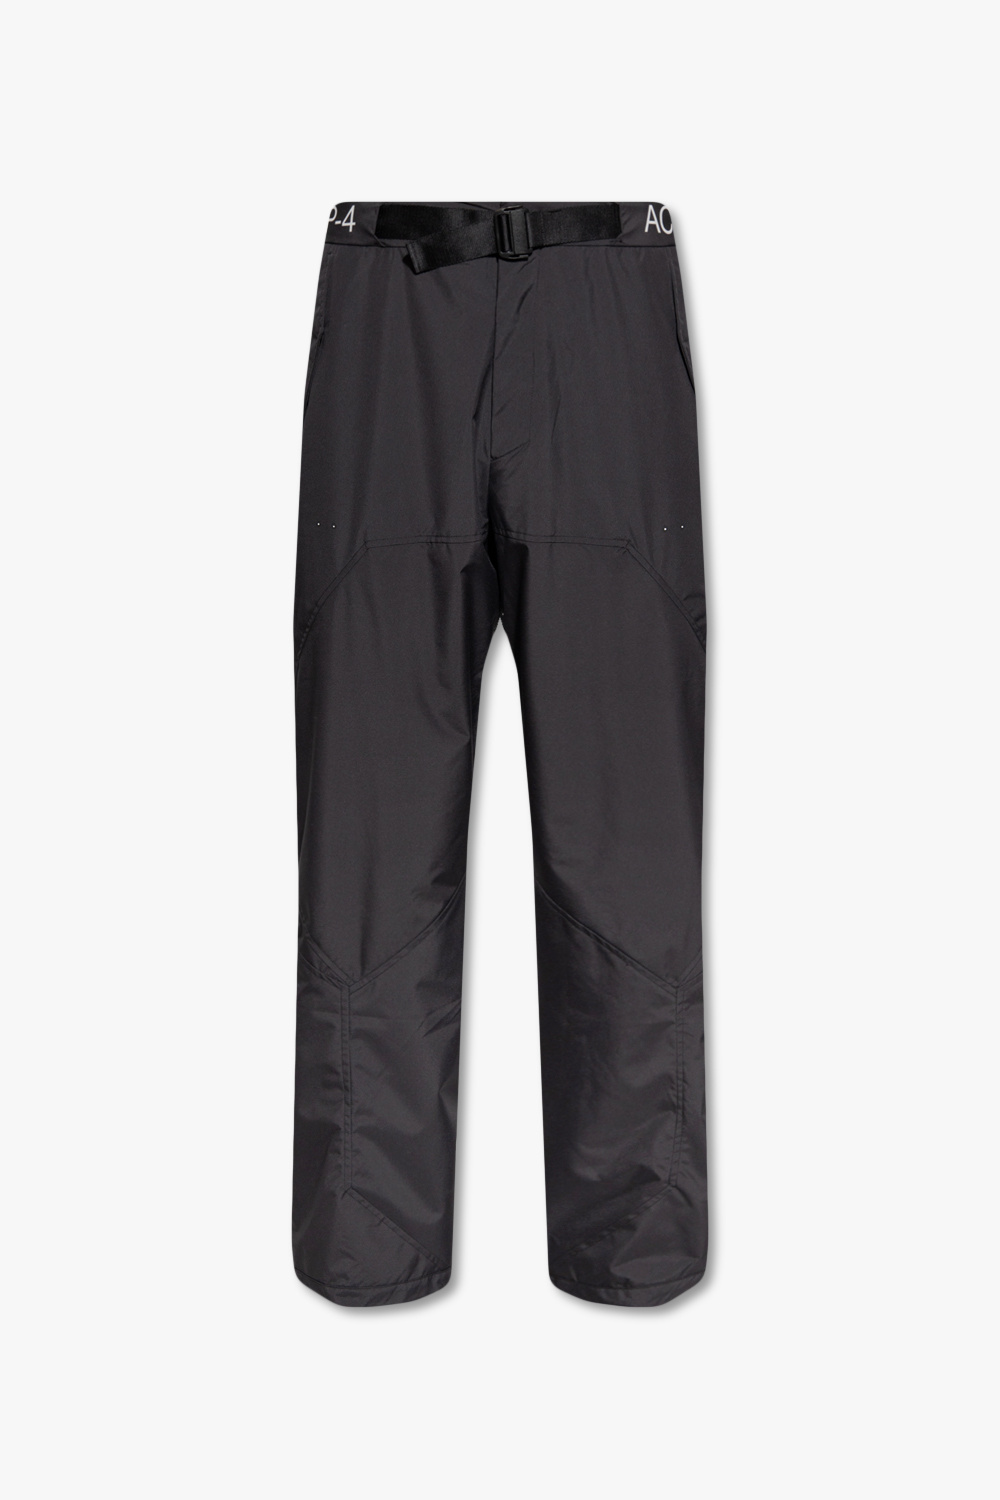 A-COLD-WALL* ‘Nephin’ trousers